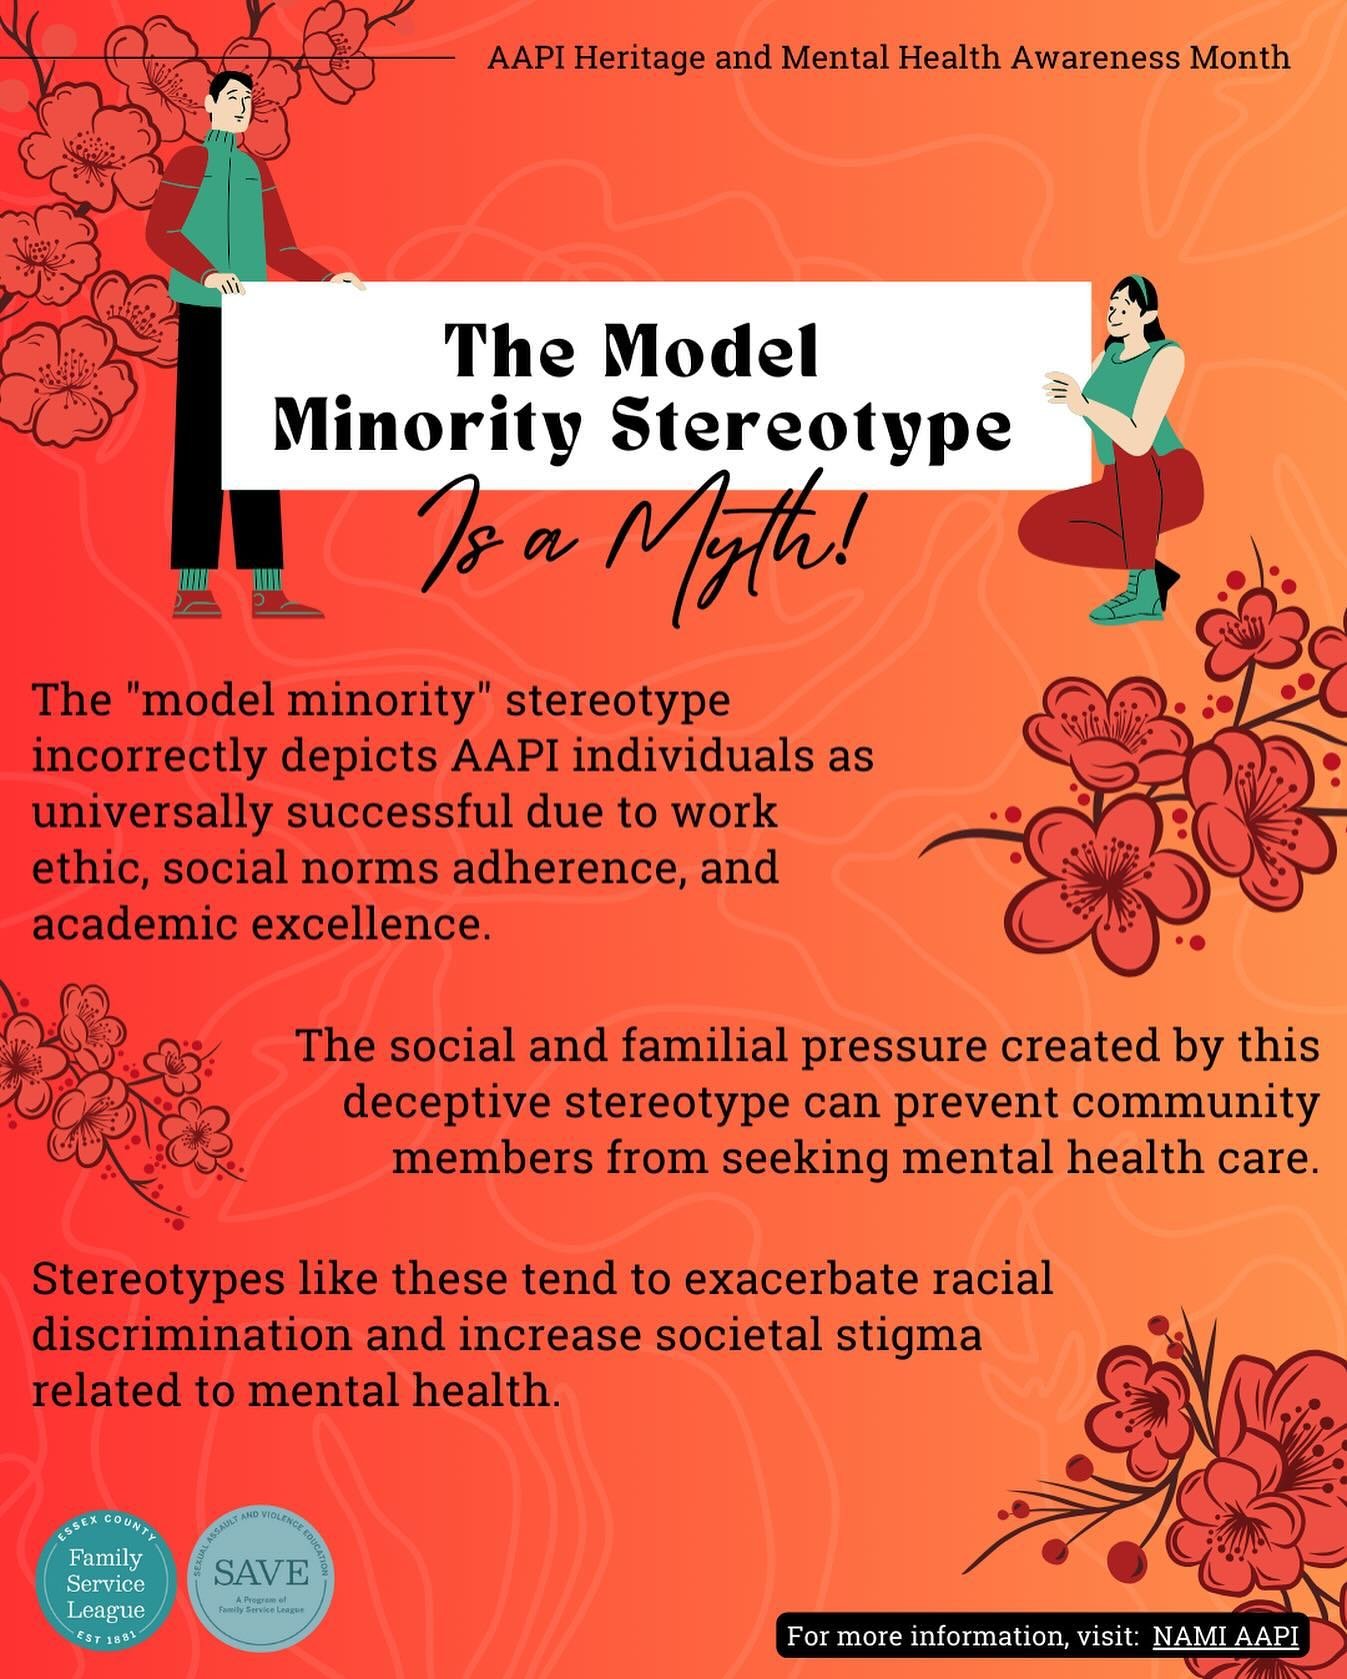 The Asian American and Pacific Islander (AAPI) community faces racial and ethnic discrimination, including the pervasive Model Minority stereotype. By increasing awareness of these misconceptions, the harmful effects of such biases can be mitigated. 